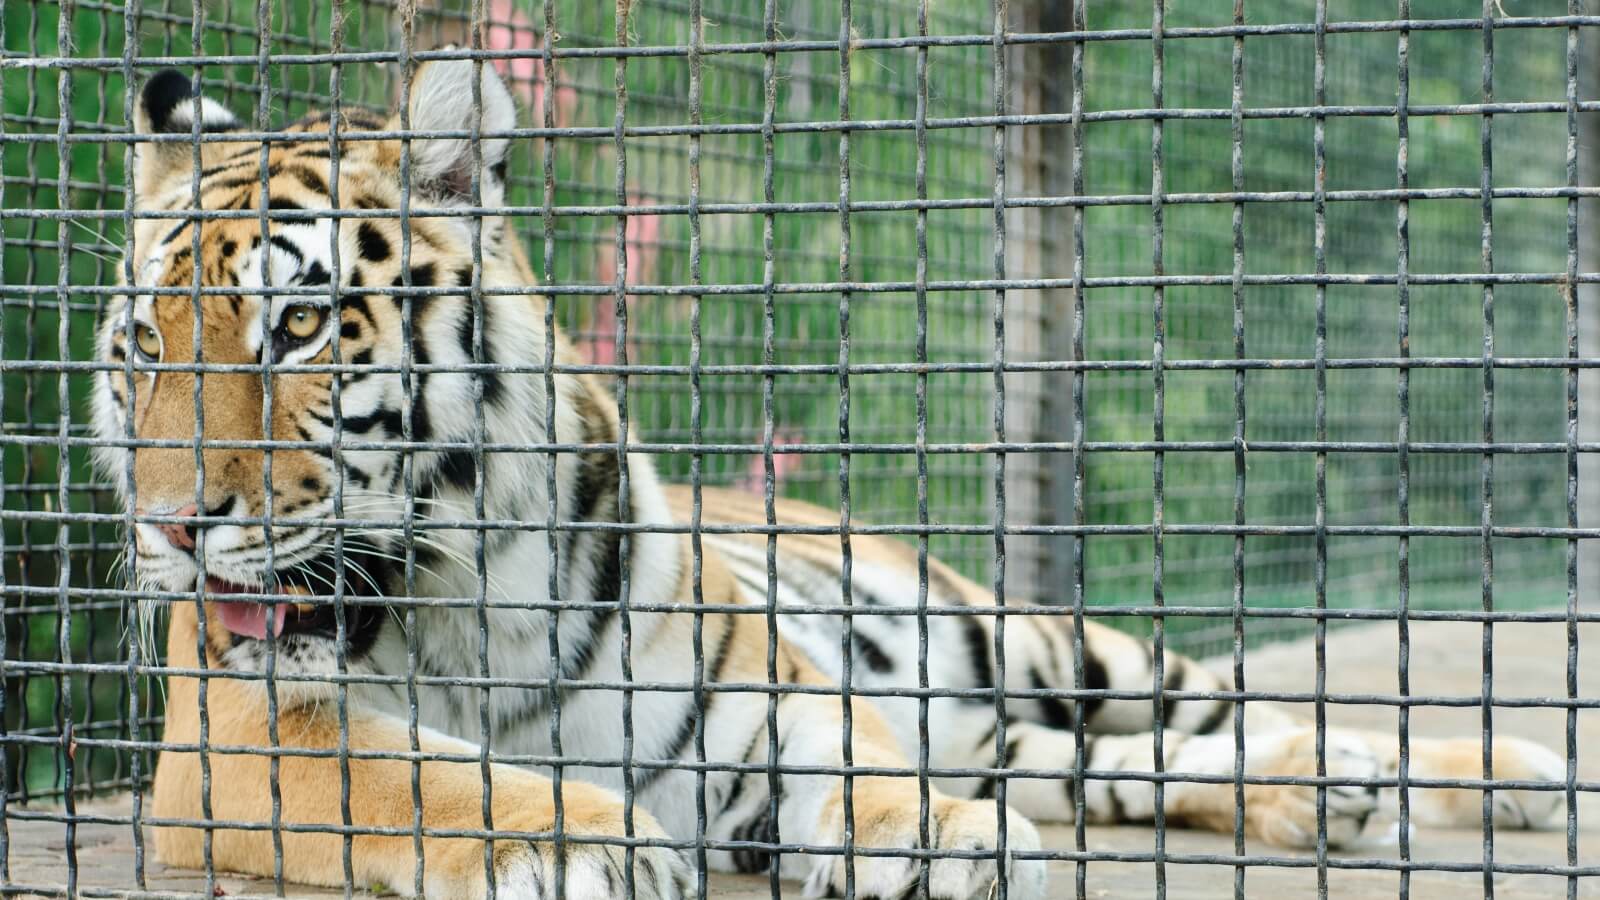 Zoo Owner Pleads Guilty To Neglect After Having 200 Animals Seized, Avoids  Criminal Charges - Plant Based News